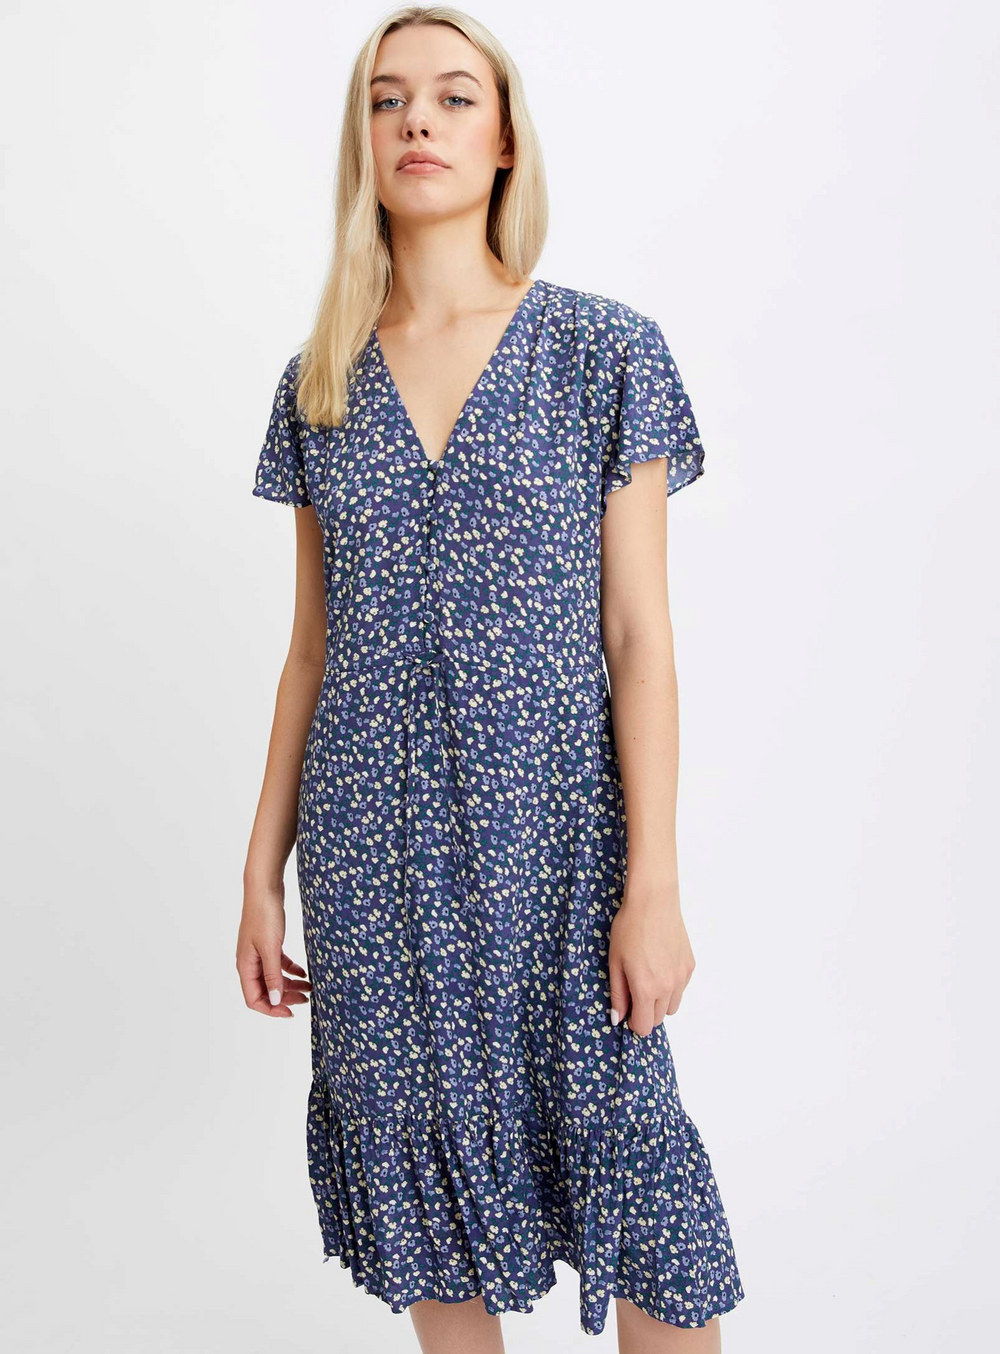 ANETRA | Knee-Length Navy Floral Dress  || ANETRA  | Robe Fleurie Marine Longueur Genou